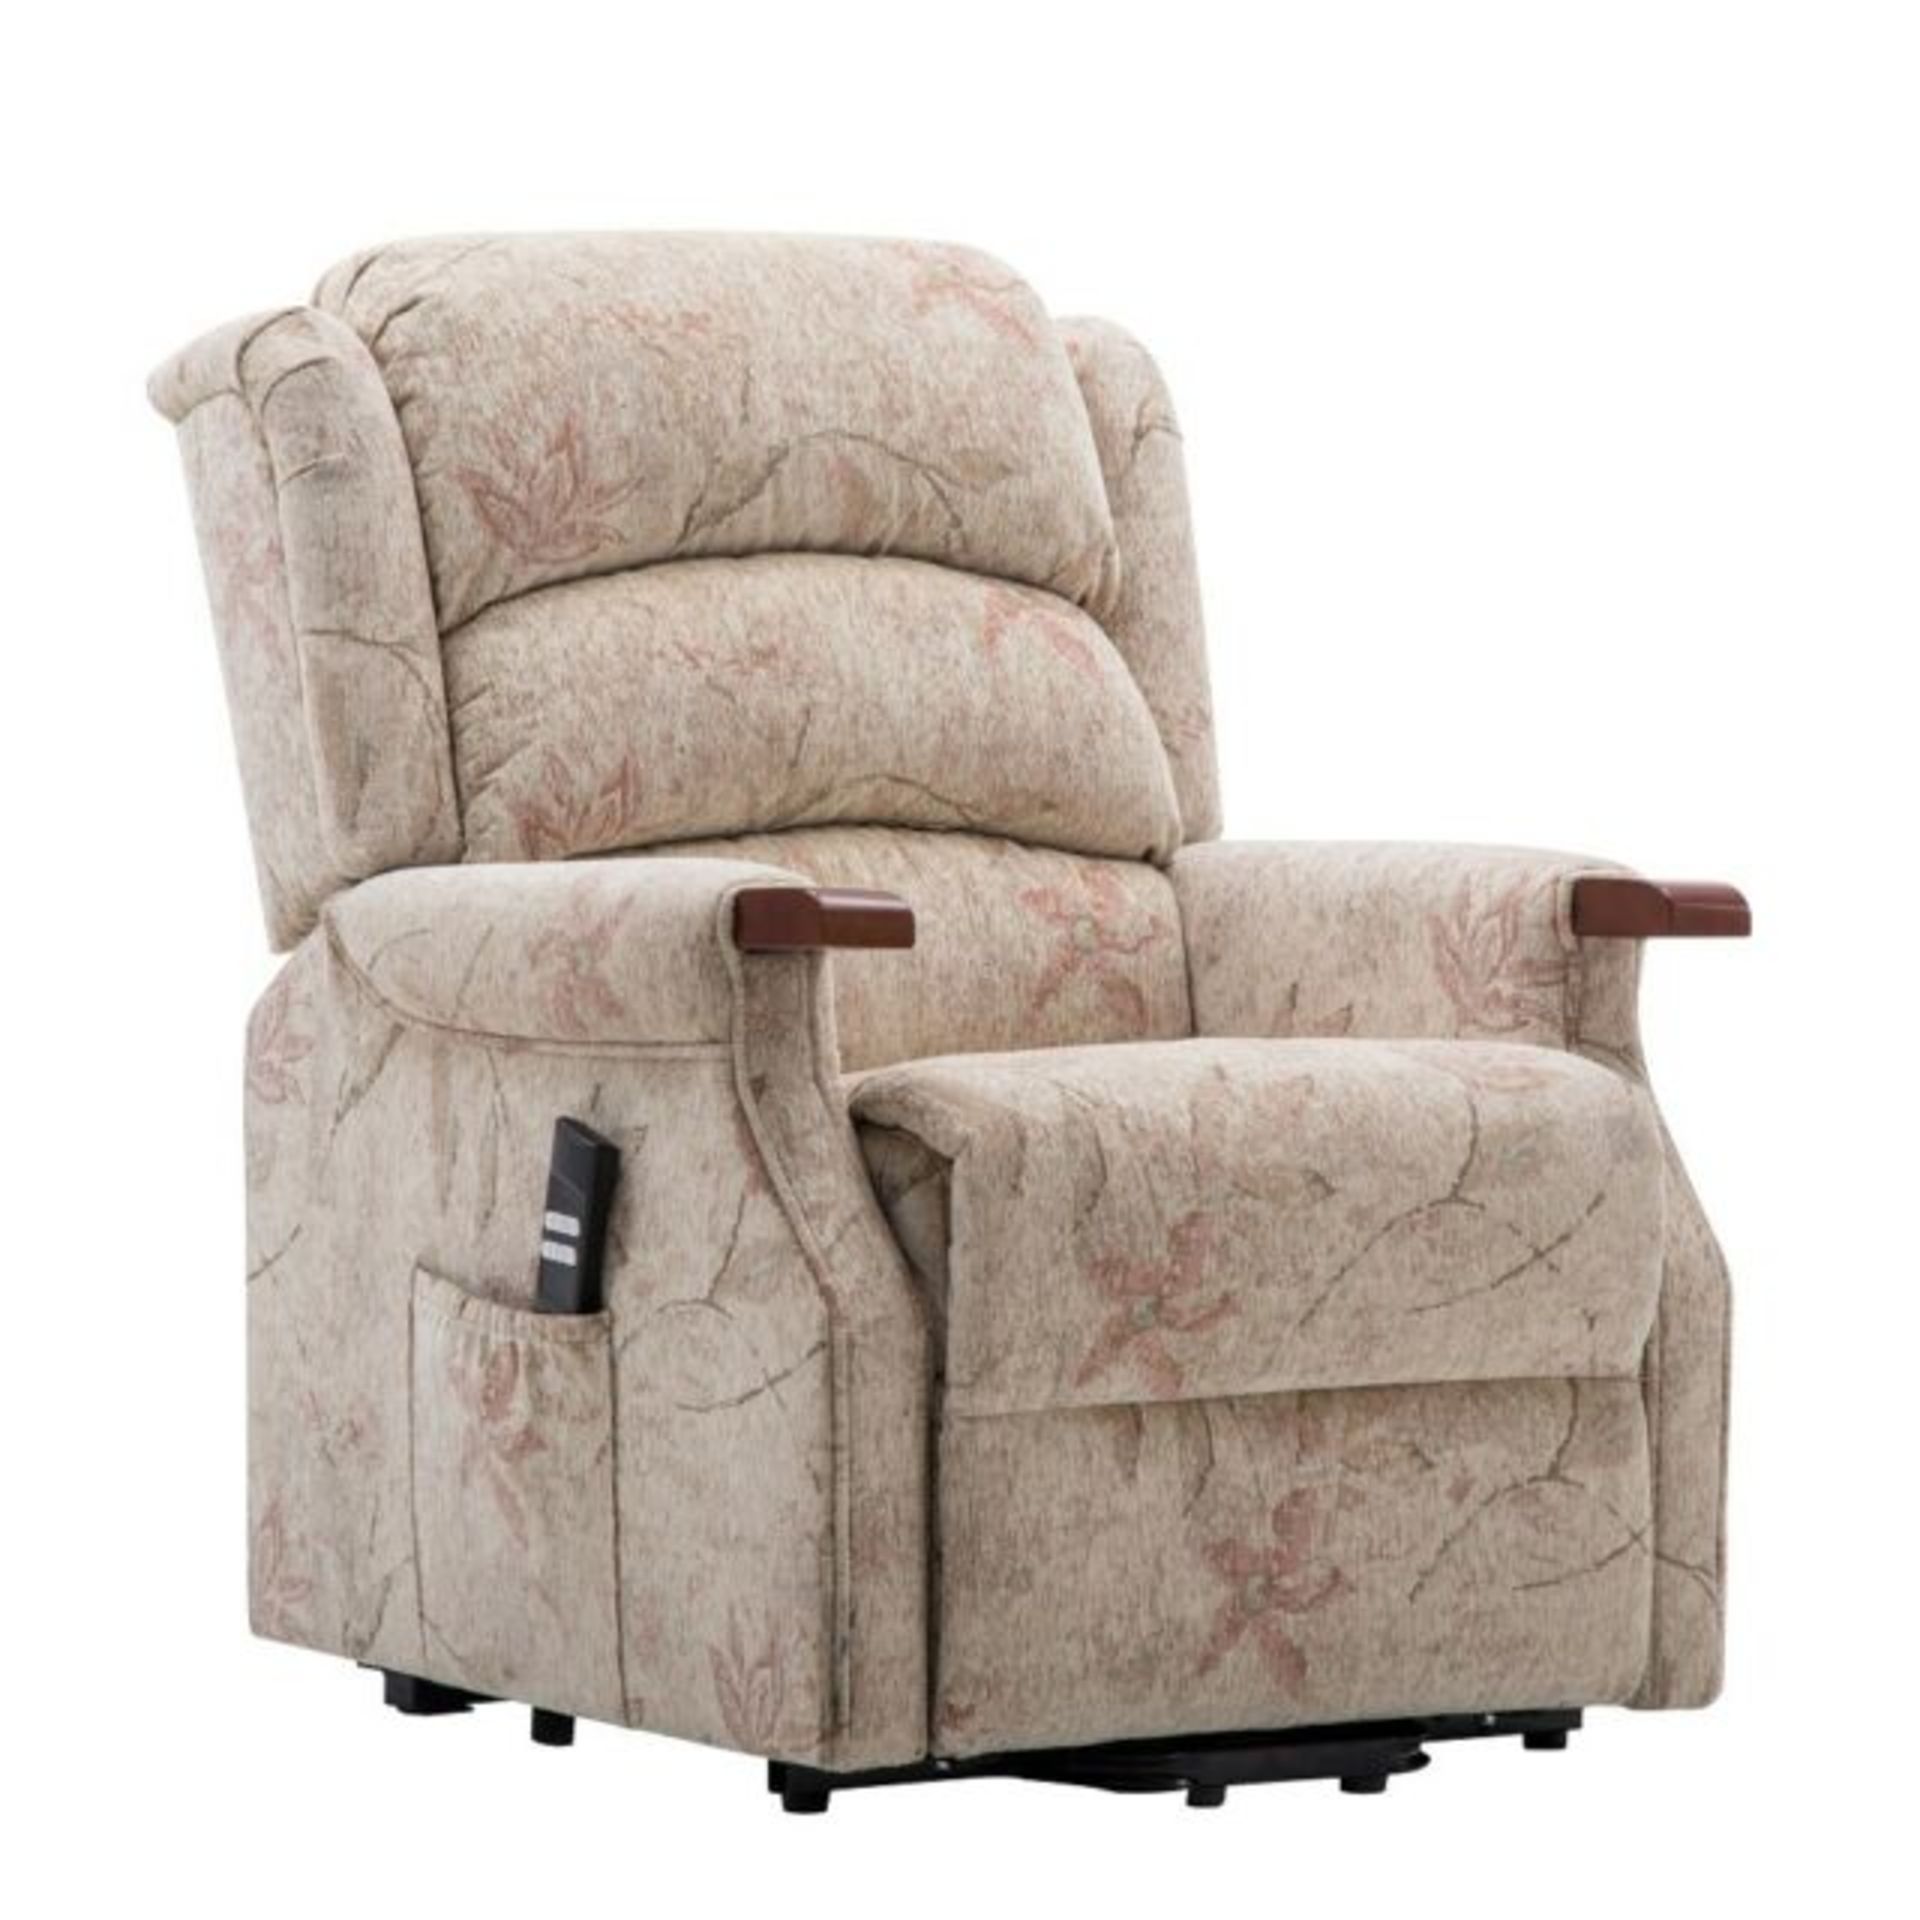 BRAND NEW BOXED LEICESTER RISE/RECLINER DUAL MOTOR ELECTRIC CHAIR